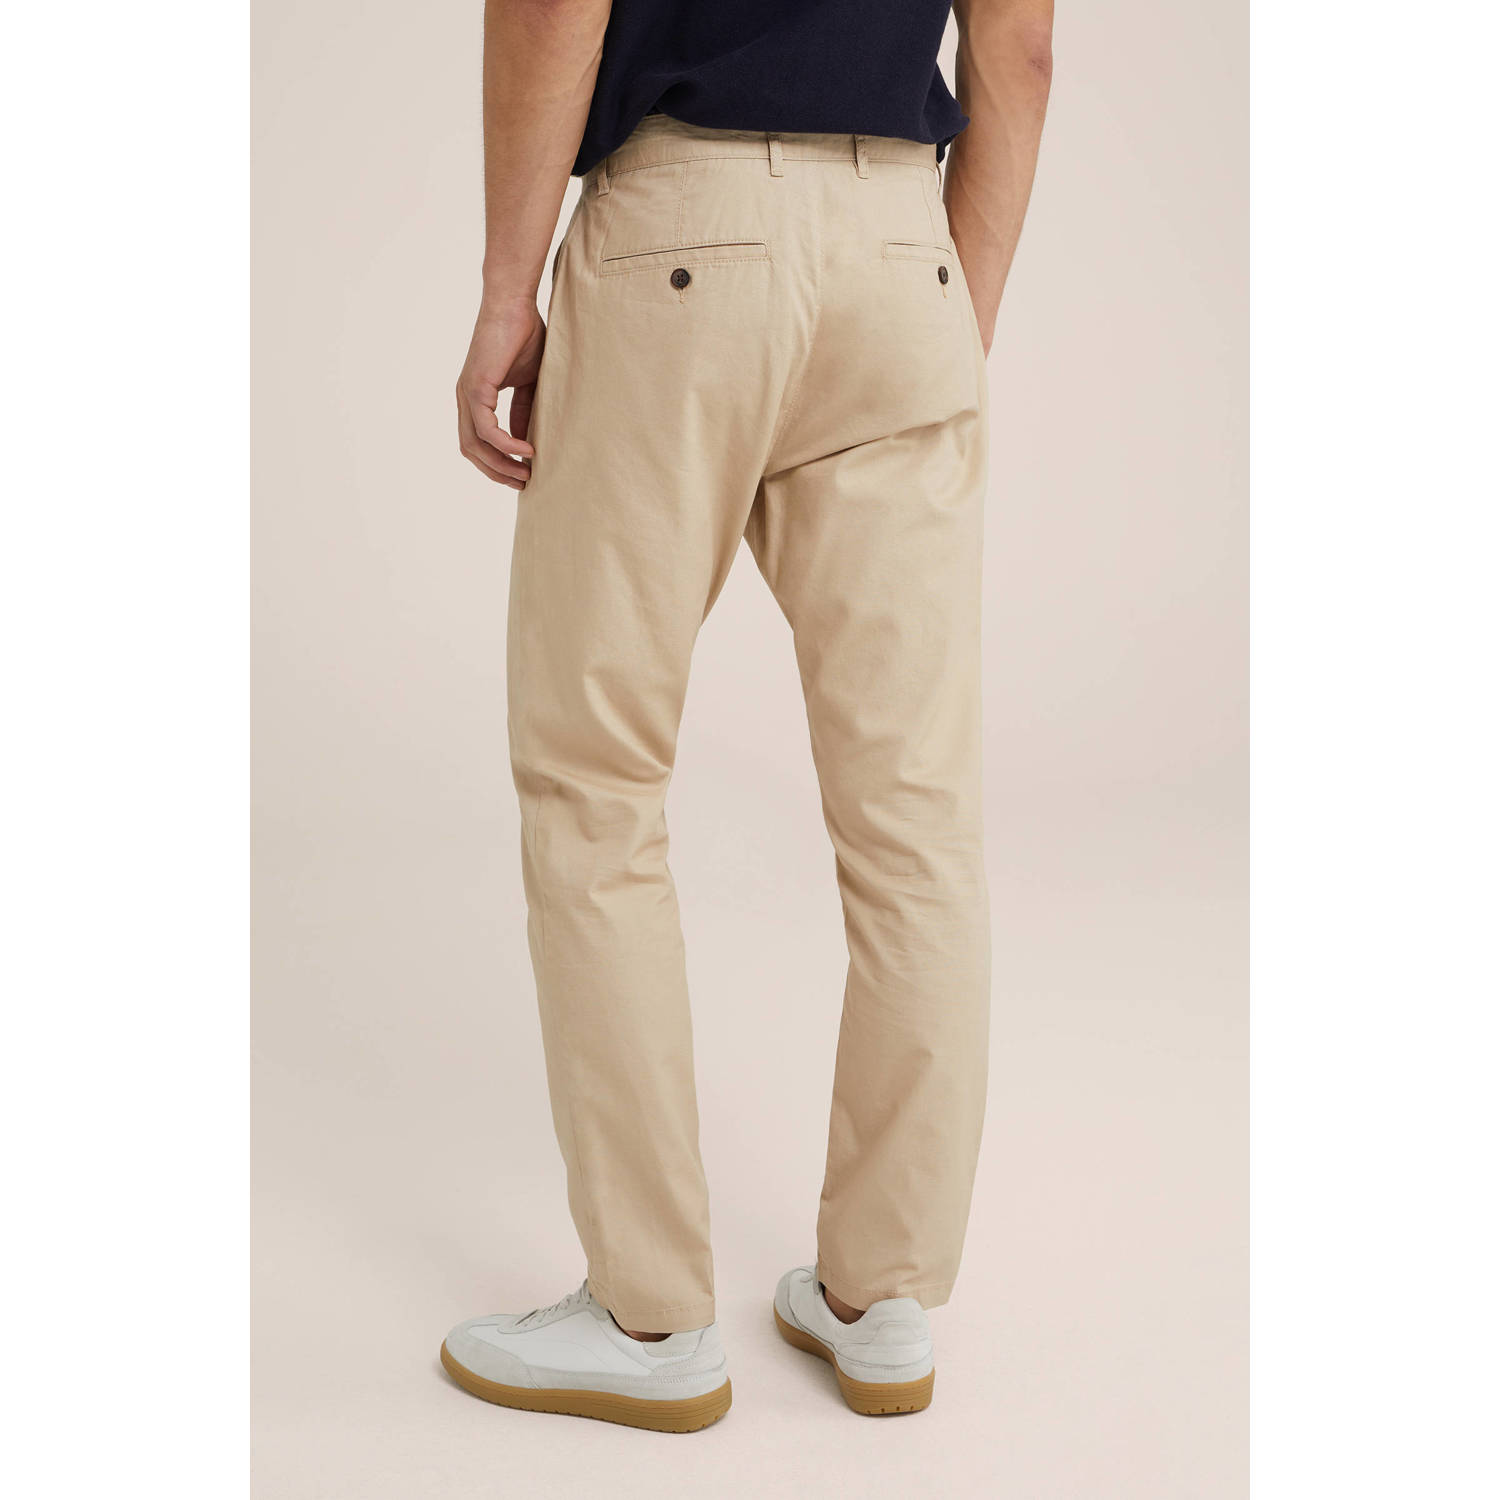 WE Fashion tapered fit chino sesame